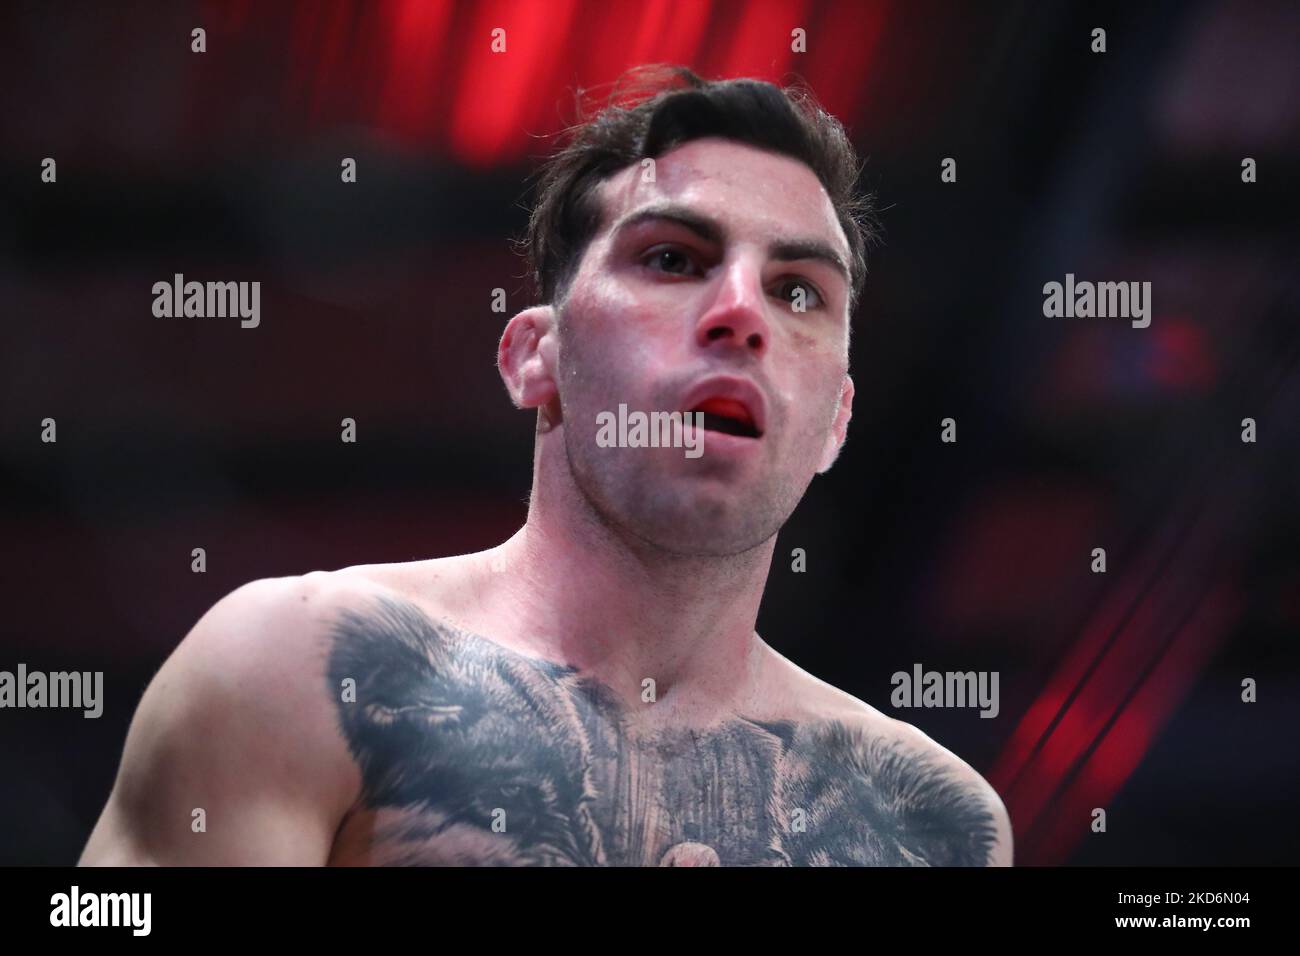 Dylan Hazan pictured prior to his flyweight bout against Raymison Bruno during Cage Warriors 136 at Bowlers Exhibition Centre in Manchester, England on Saturday 2nd April 2022. (Photo by Kieran Riley/MI News/NurPhoto) Stock Photo